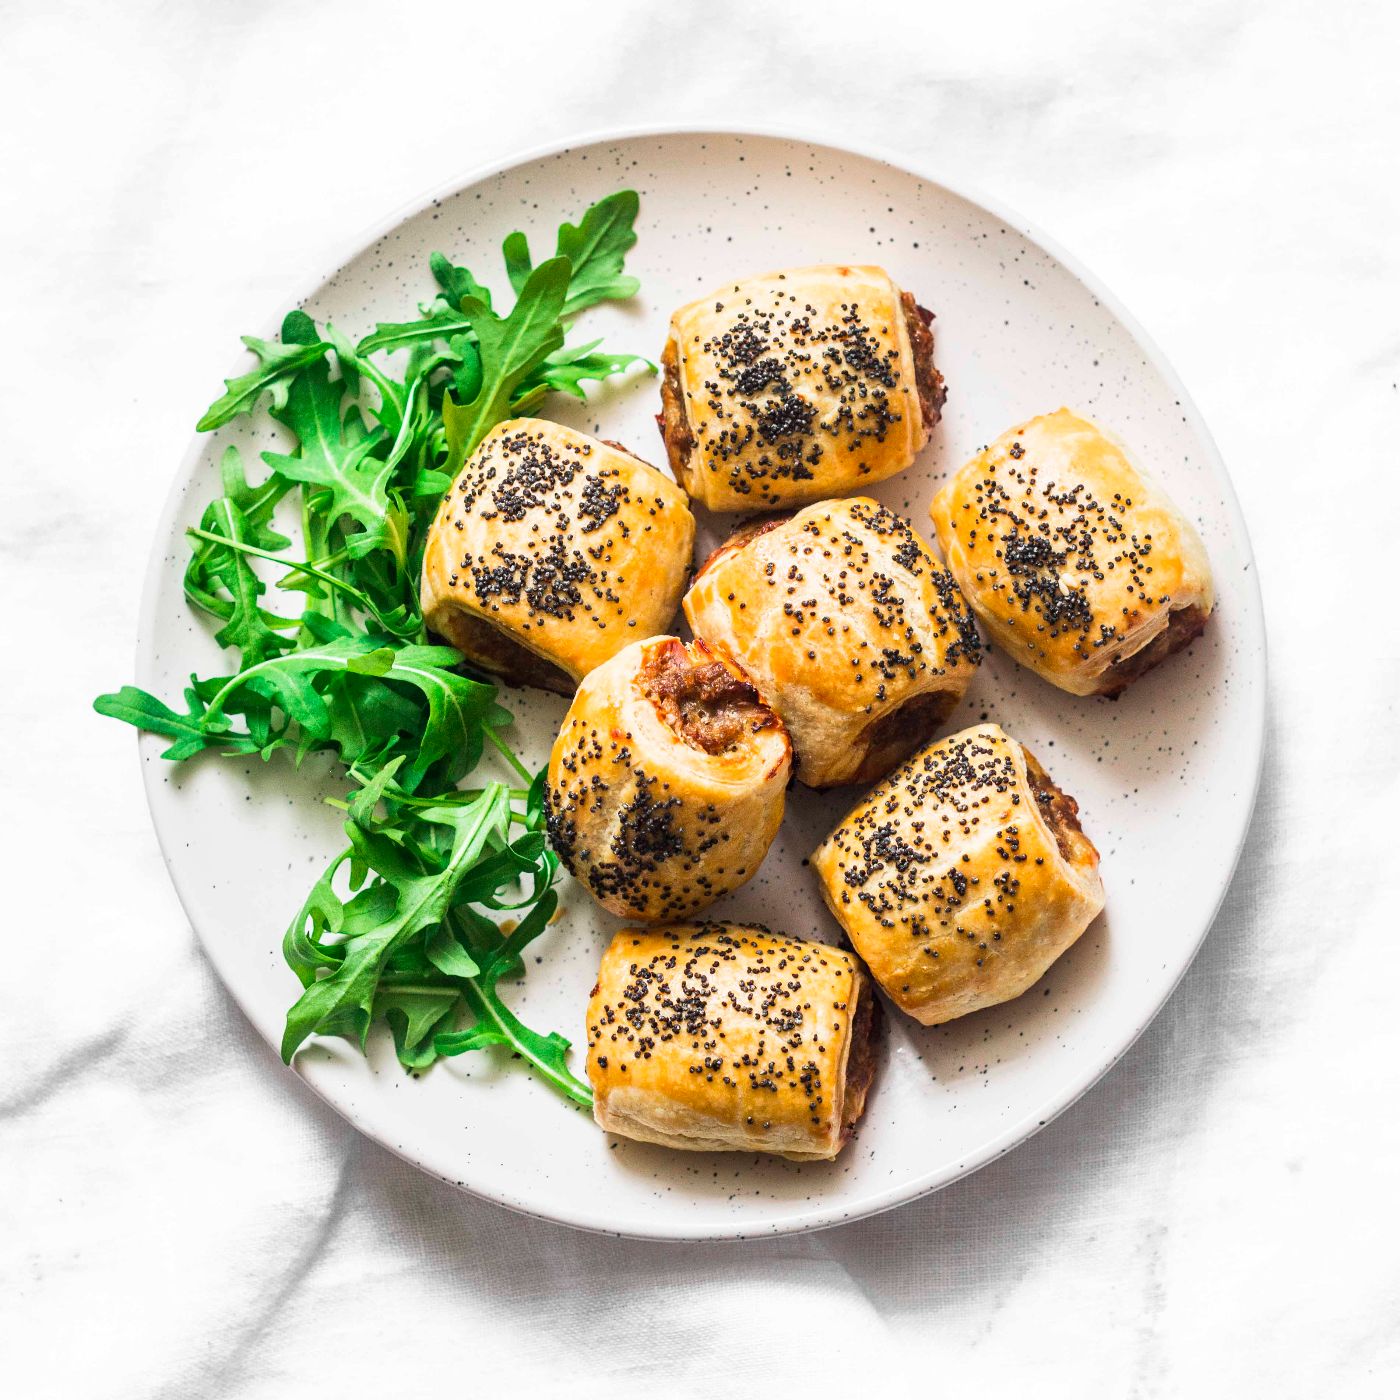 Minced-puff-pastry-rolls-and-rocket-salad---delicious-snacks,-tapas,-breakfast-on-light-background,-top-view.-Sausage-rolls-1130307407_3802x5342 square.jpg